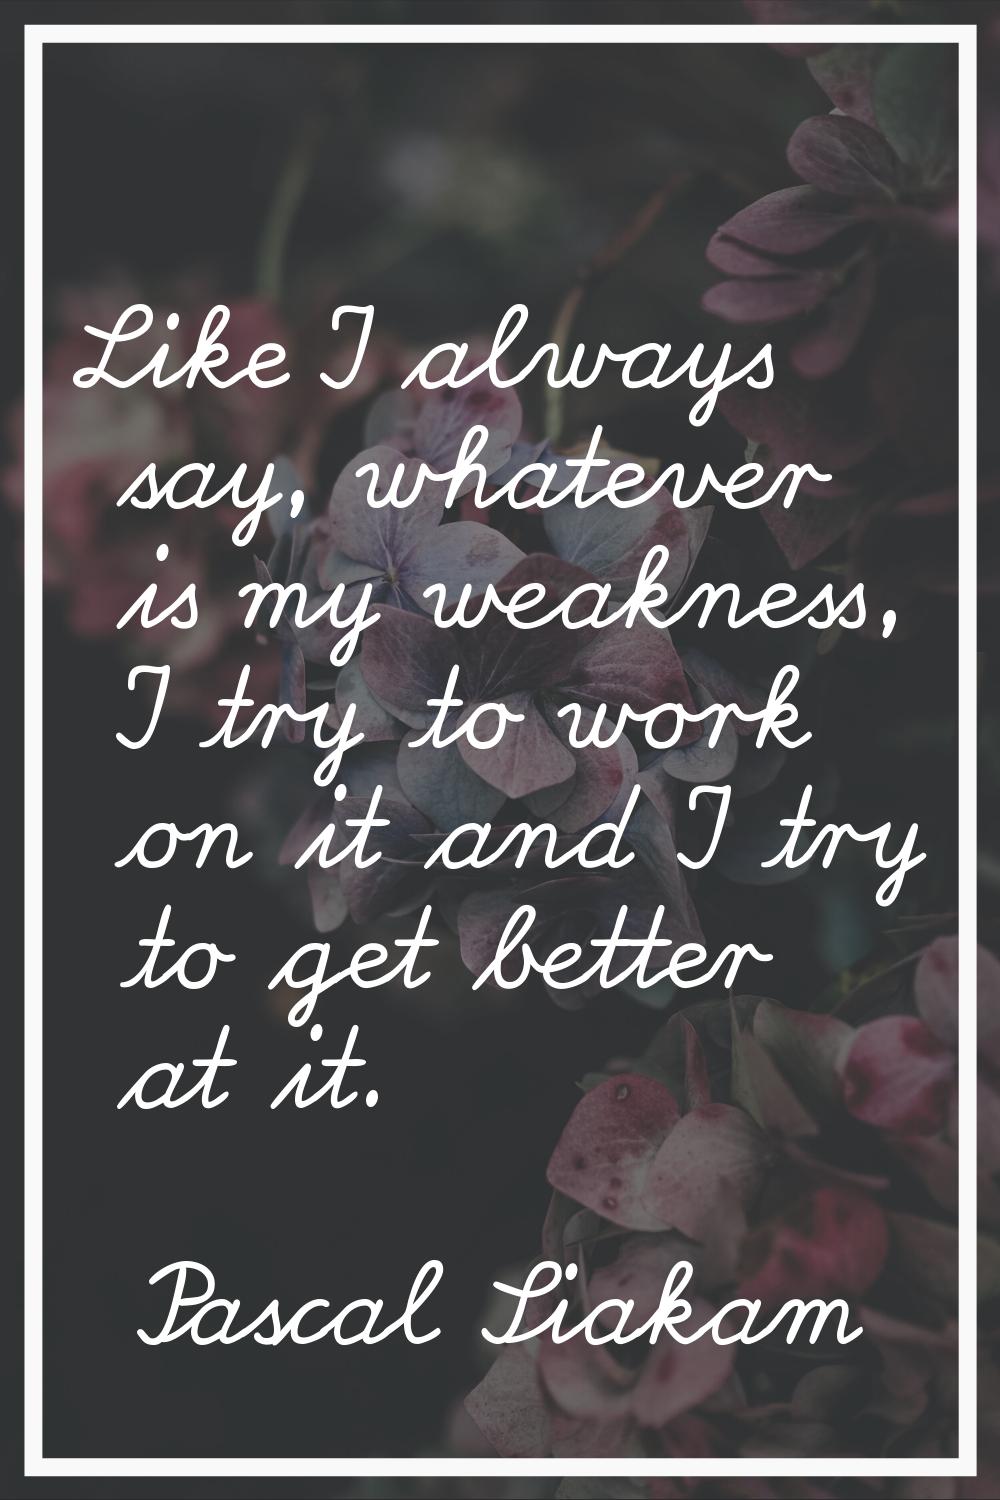 Like I always say, whatever is my weakness, I try to work on it and I try to get better at it.